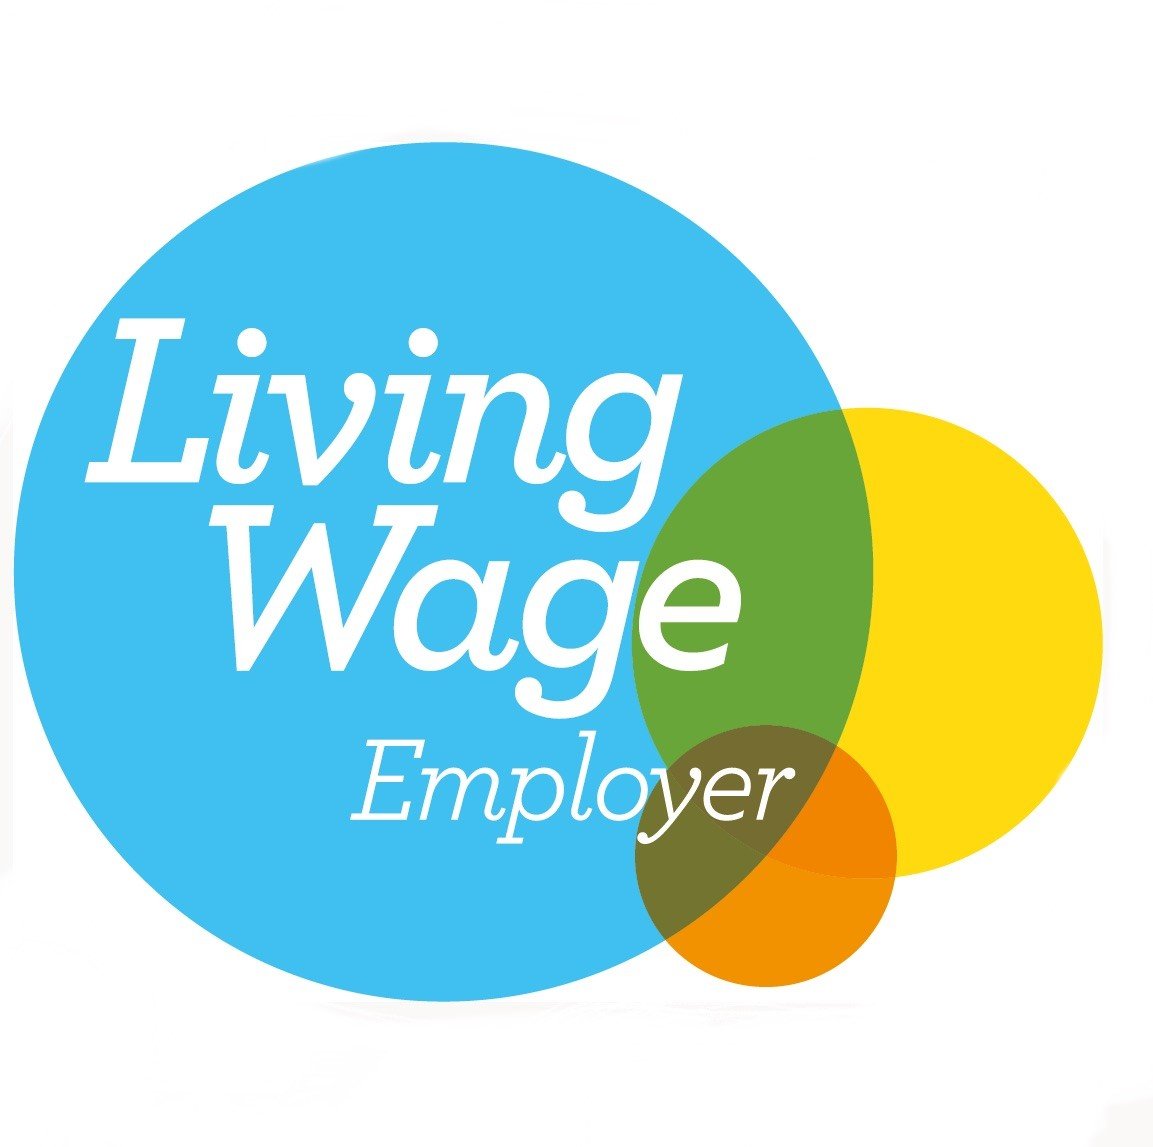 The PC Support Group’s Commitment to the real Living Wage